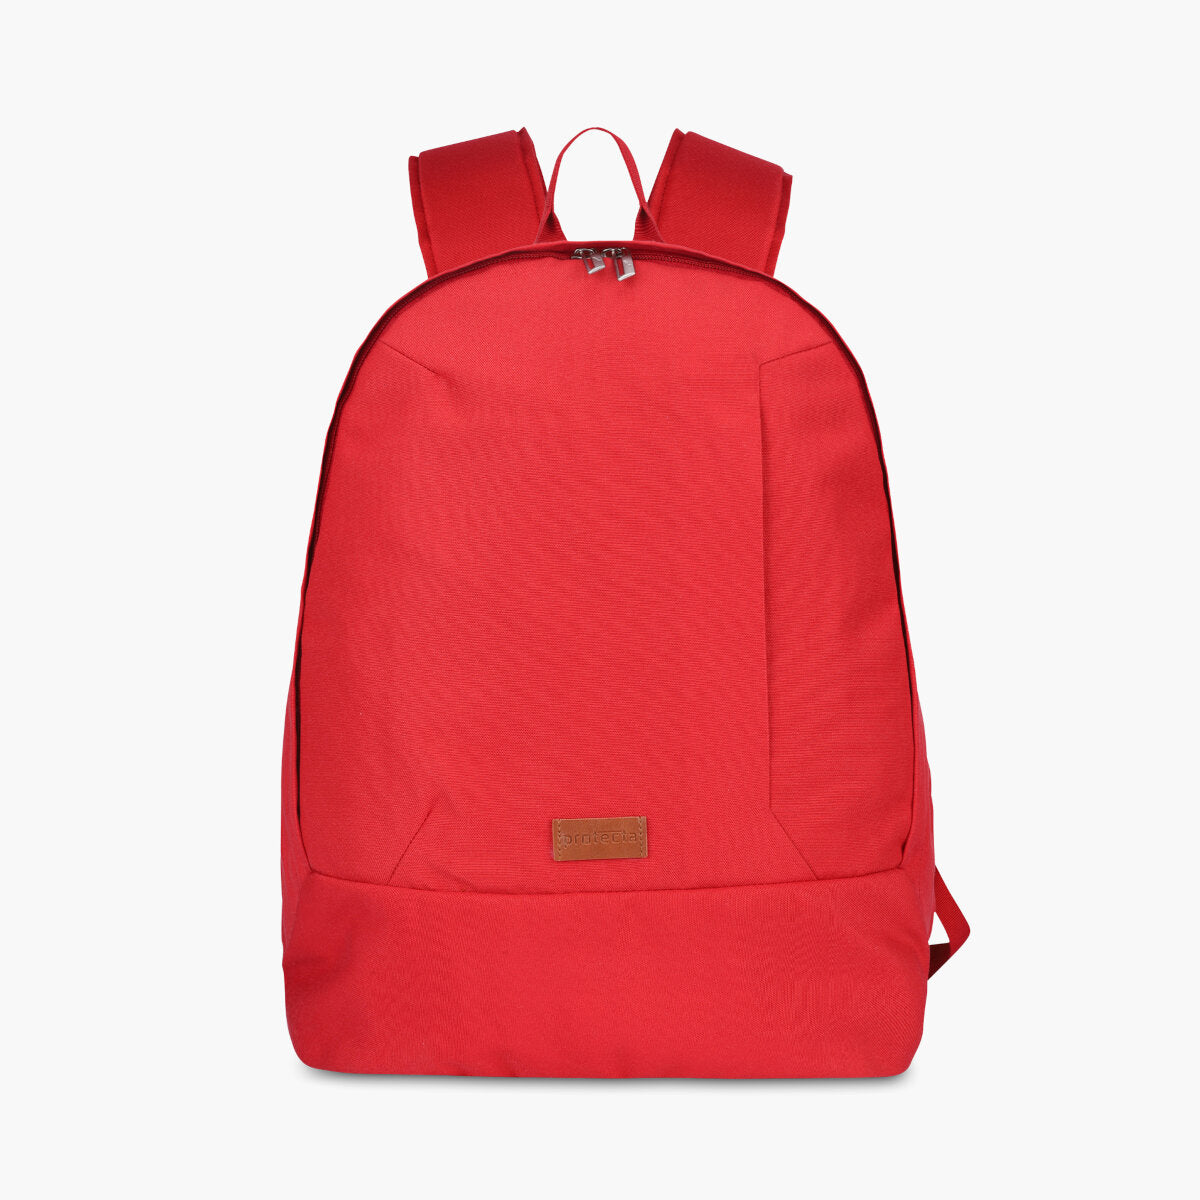 Red | Protecta Steady Progress Laptop Backpack - Main